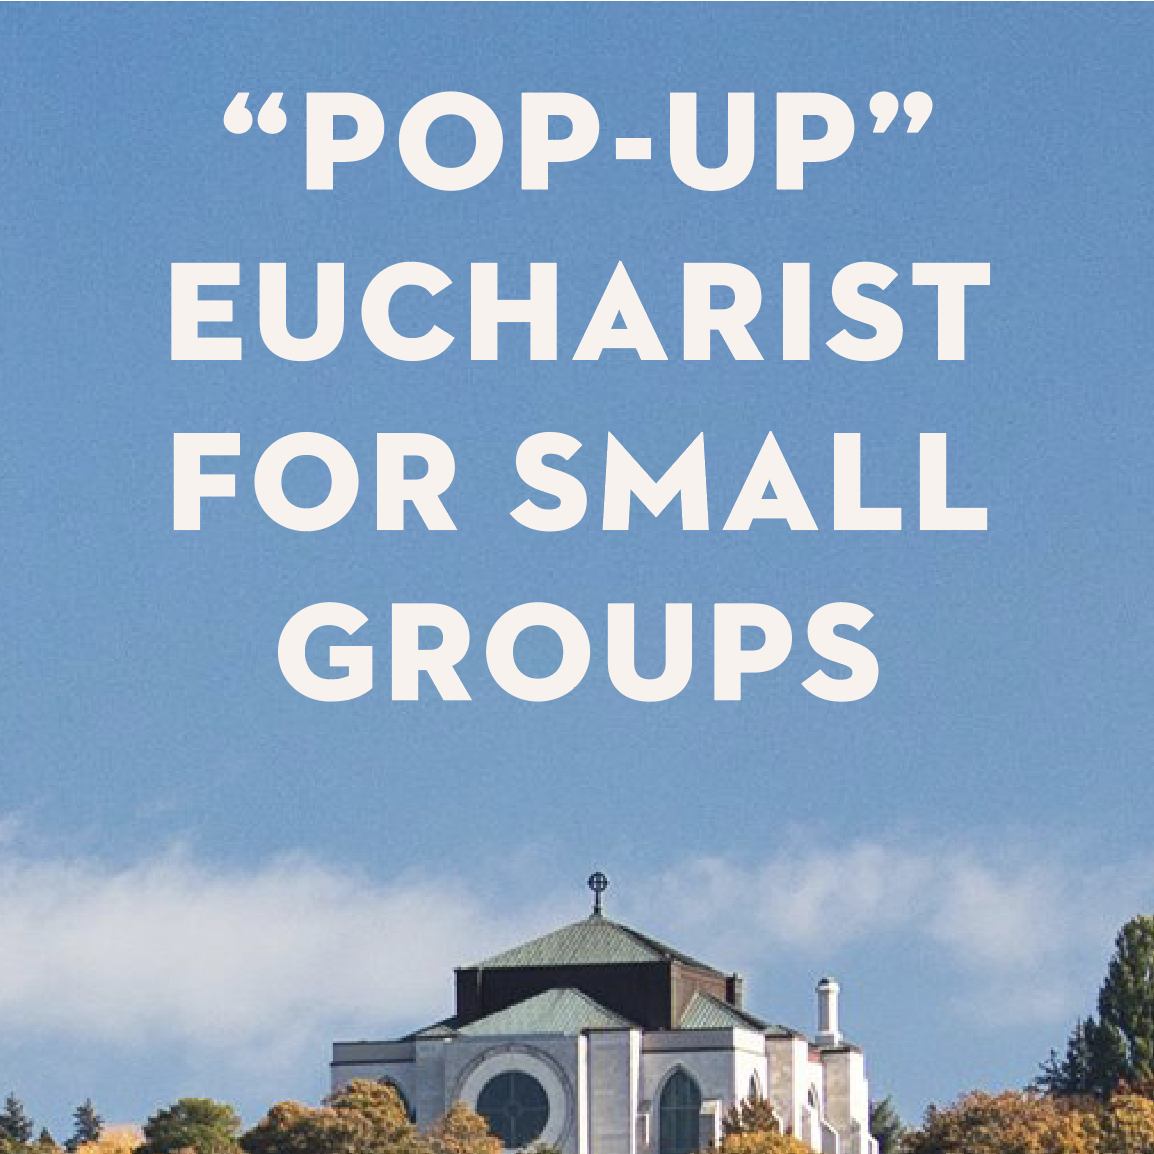 “Pop-Up” Eucharist for Small Groups